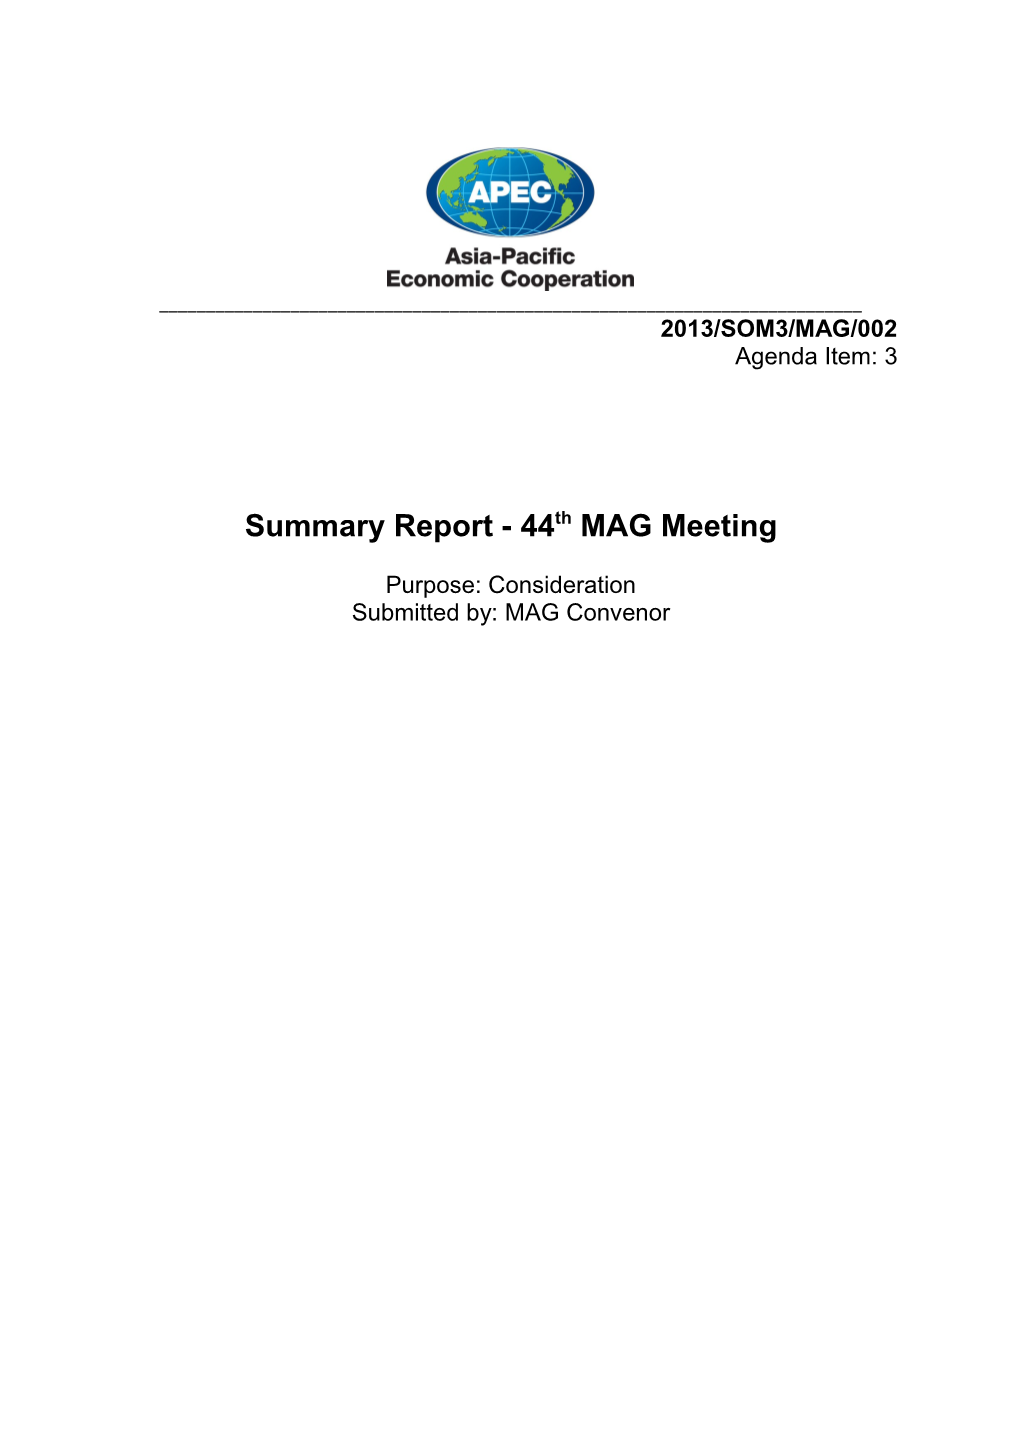 Summary Report - 44Thmag Meeting